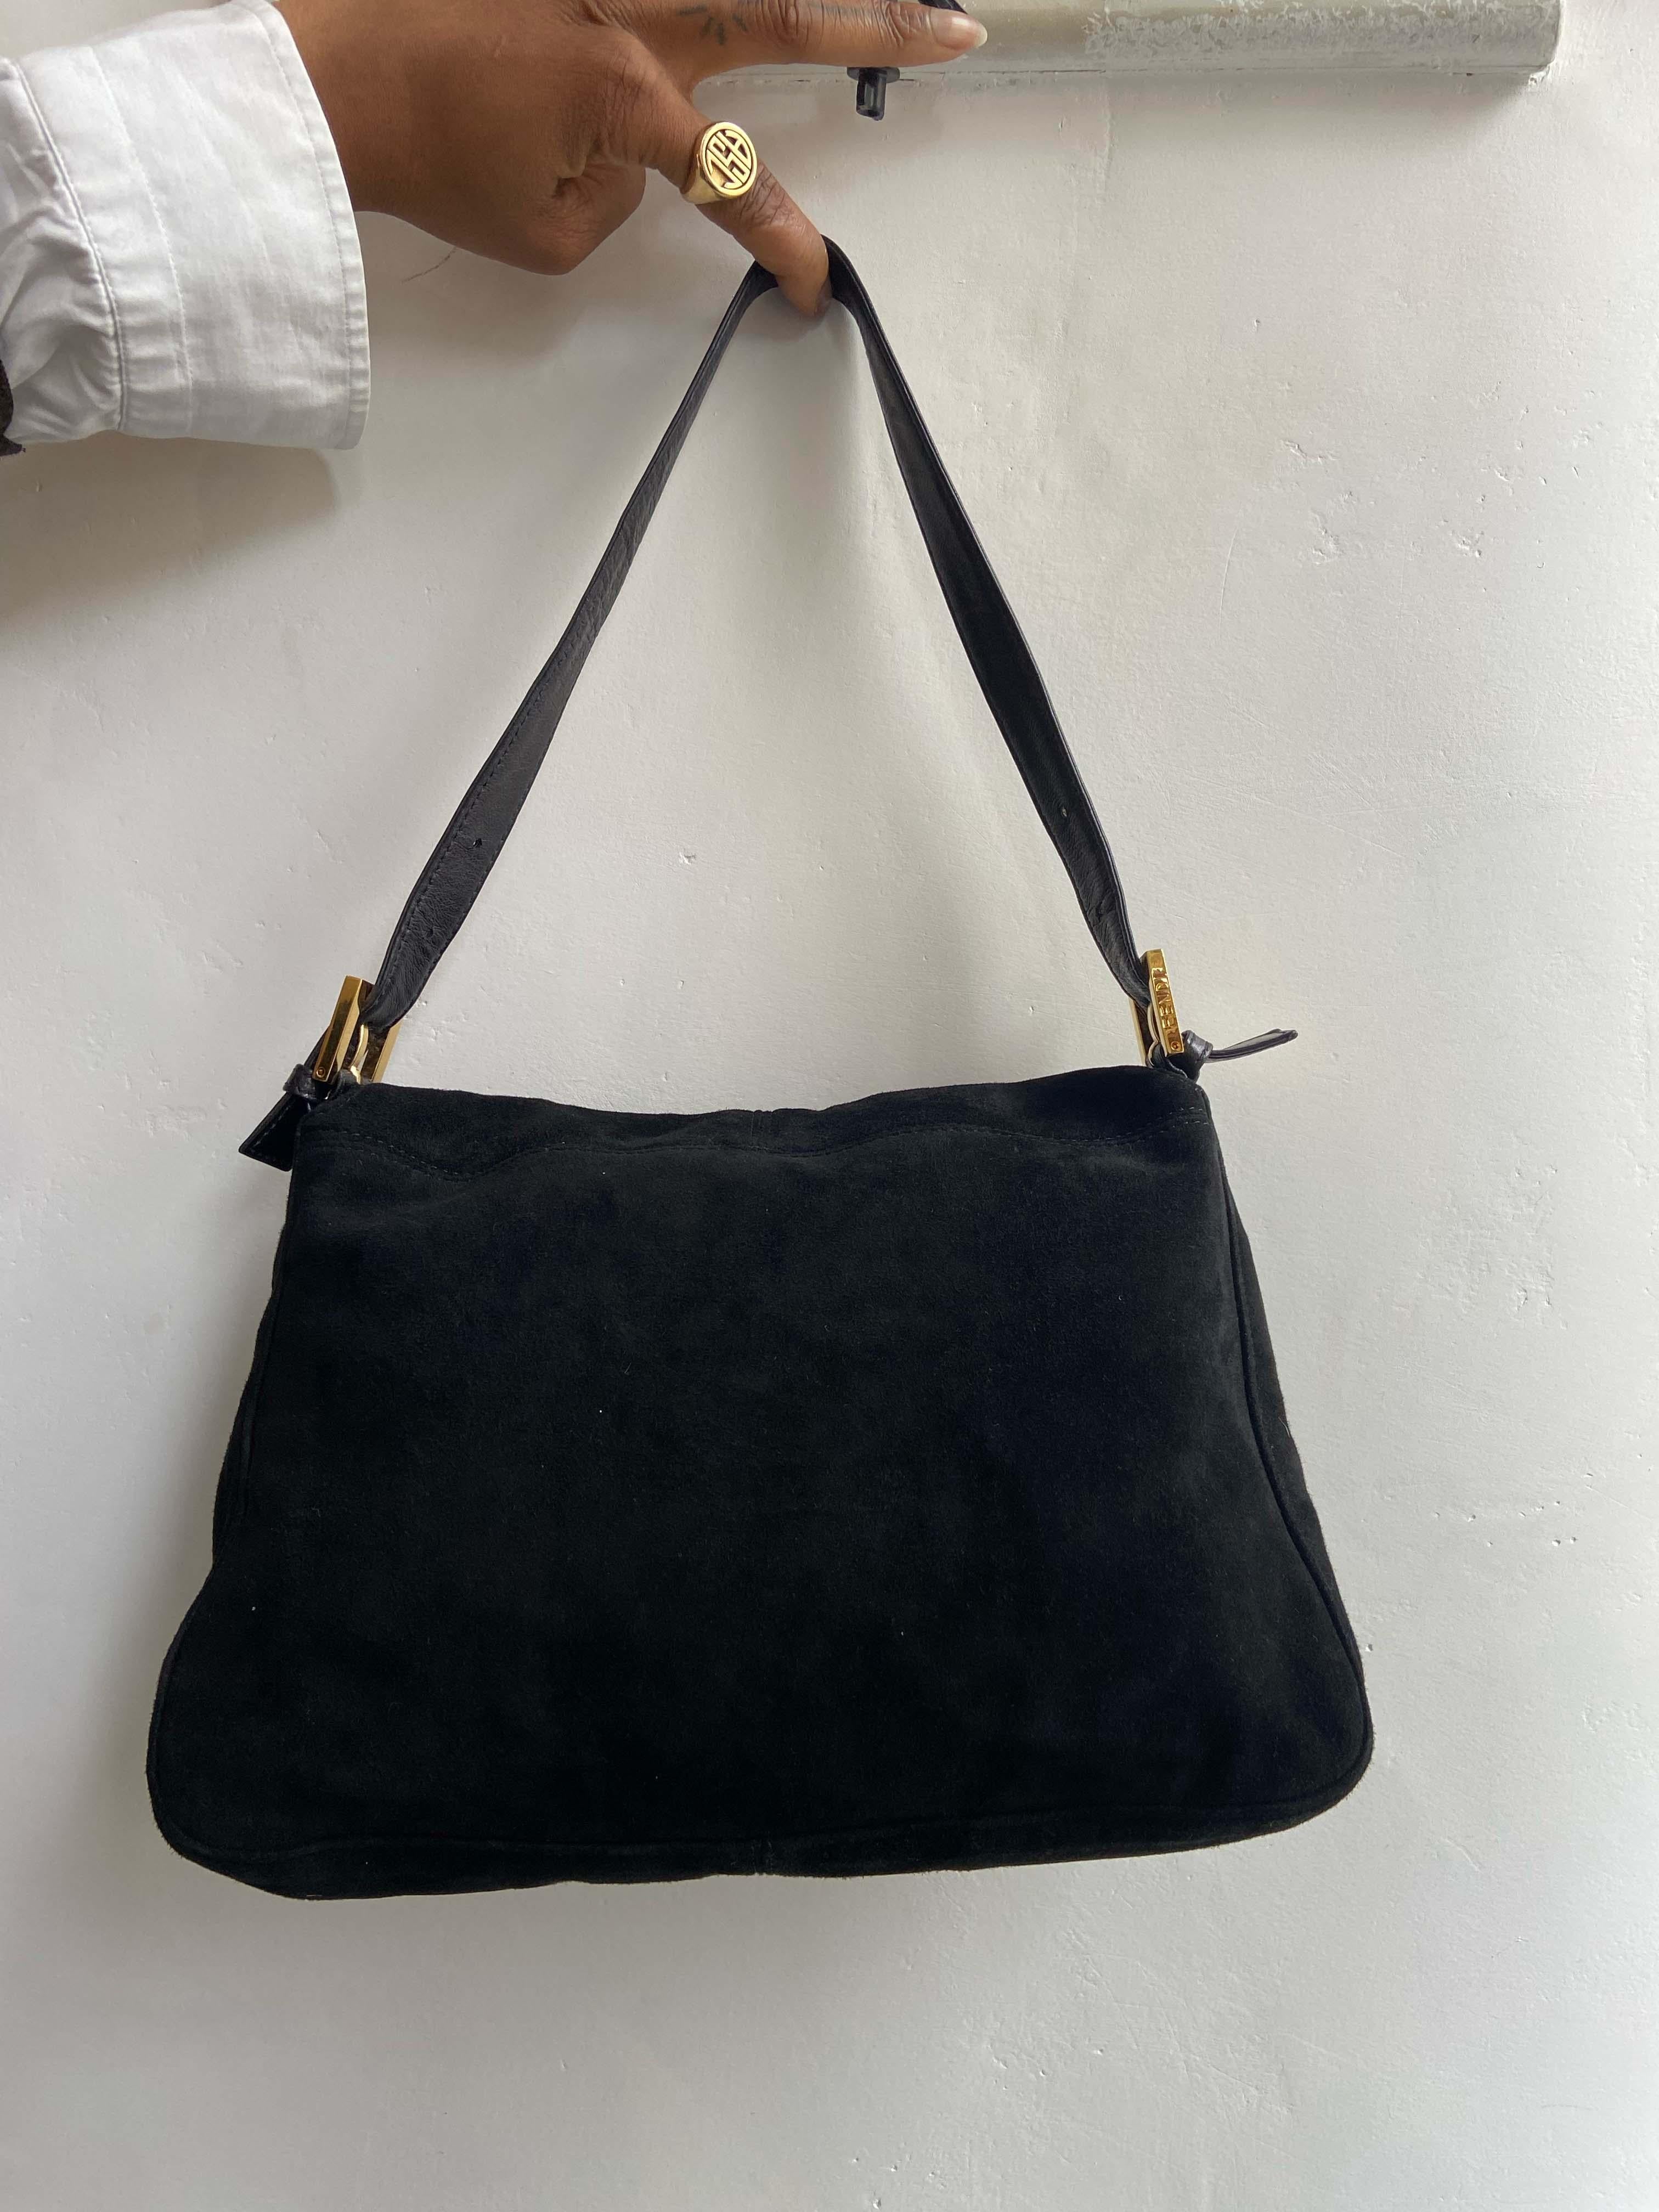 Vintage late 1990’s Fendi Mamma baguette bag .Features a black suede fabric. Iconic Fendi gold and black leather front flap with magnetic closure, branded hardware buckles and red satin lining with a zip inner back pocket. In excellent vintage